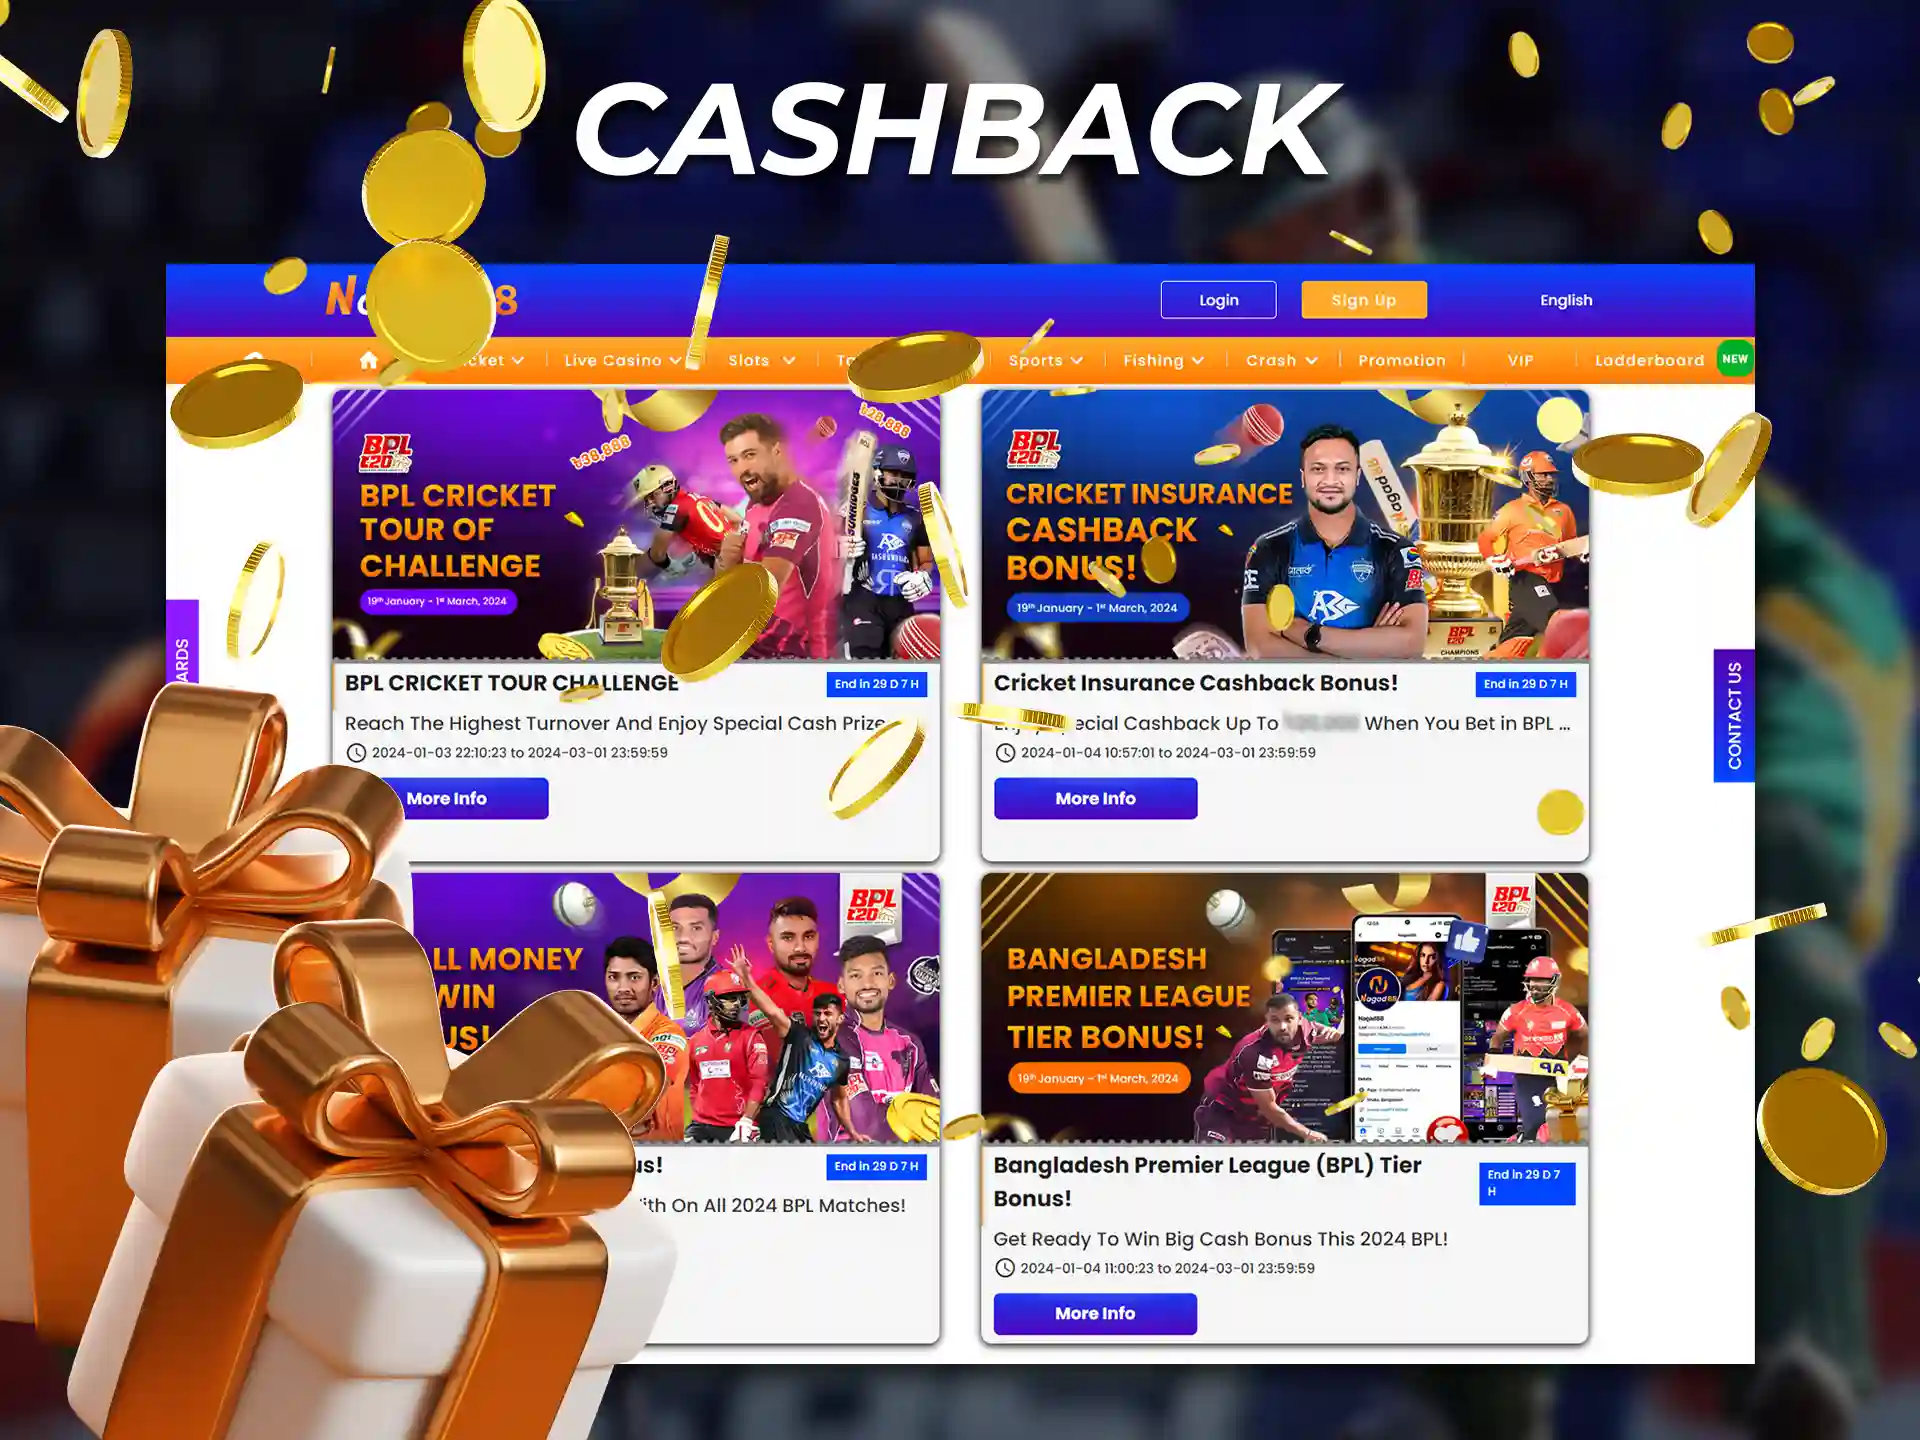 You can get a refund in the form of cash or free bets with the Cashback bonus.